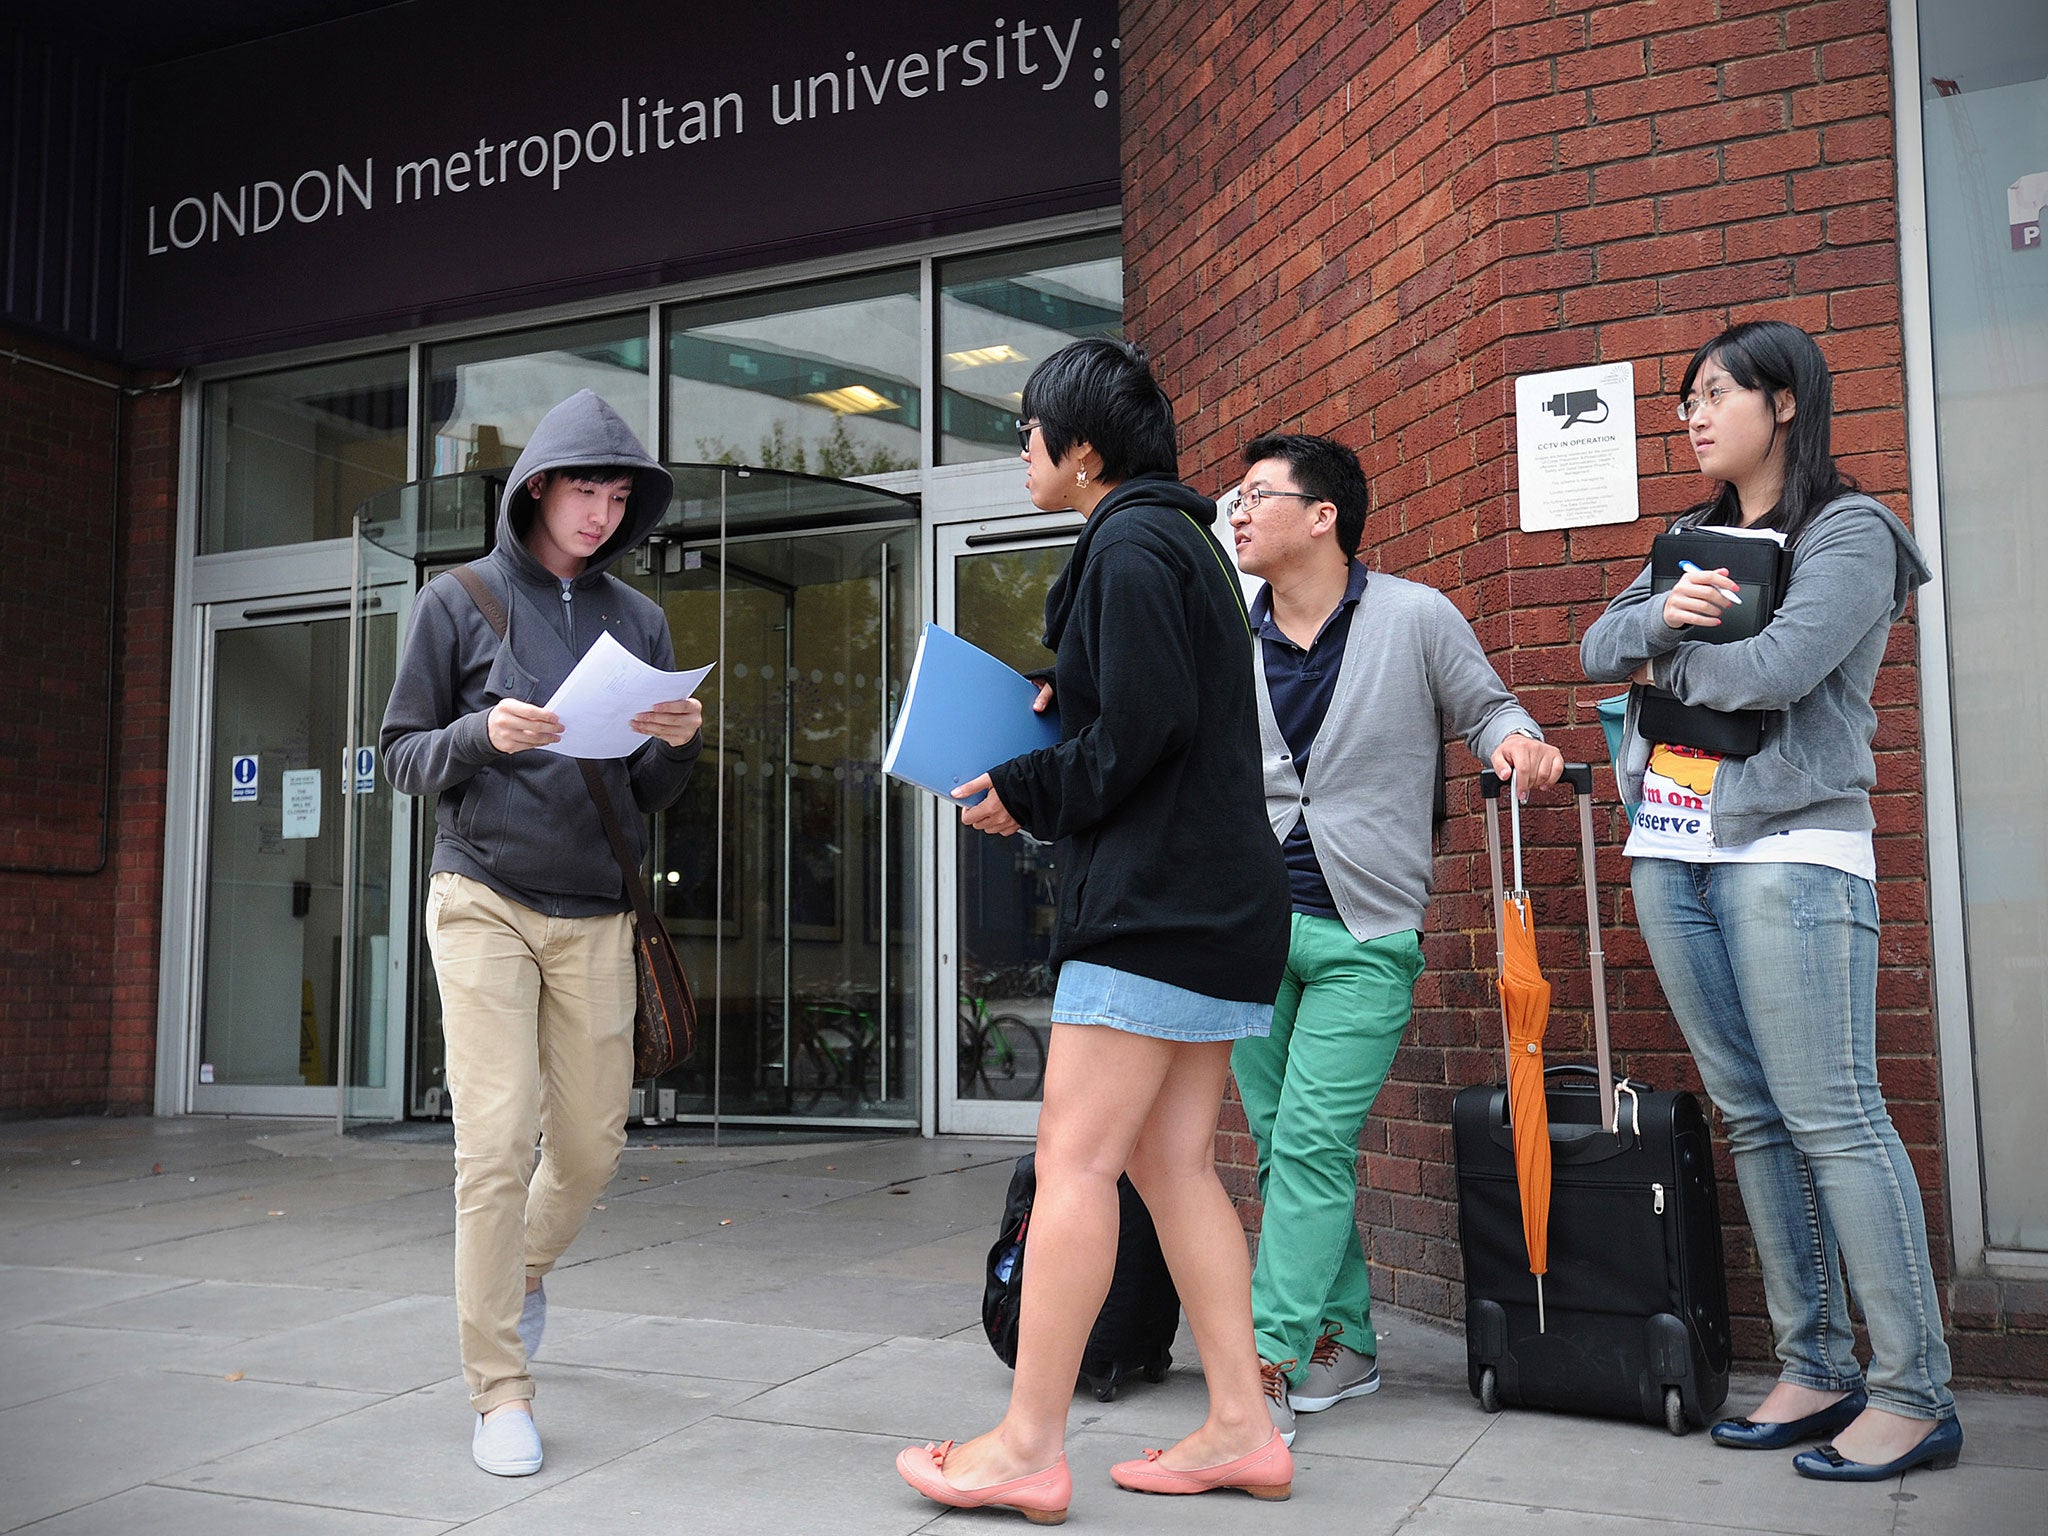 Hostile attitudes towards migration risk deterring students from studying in Britain